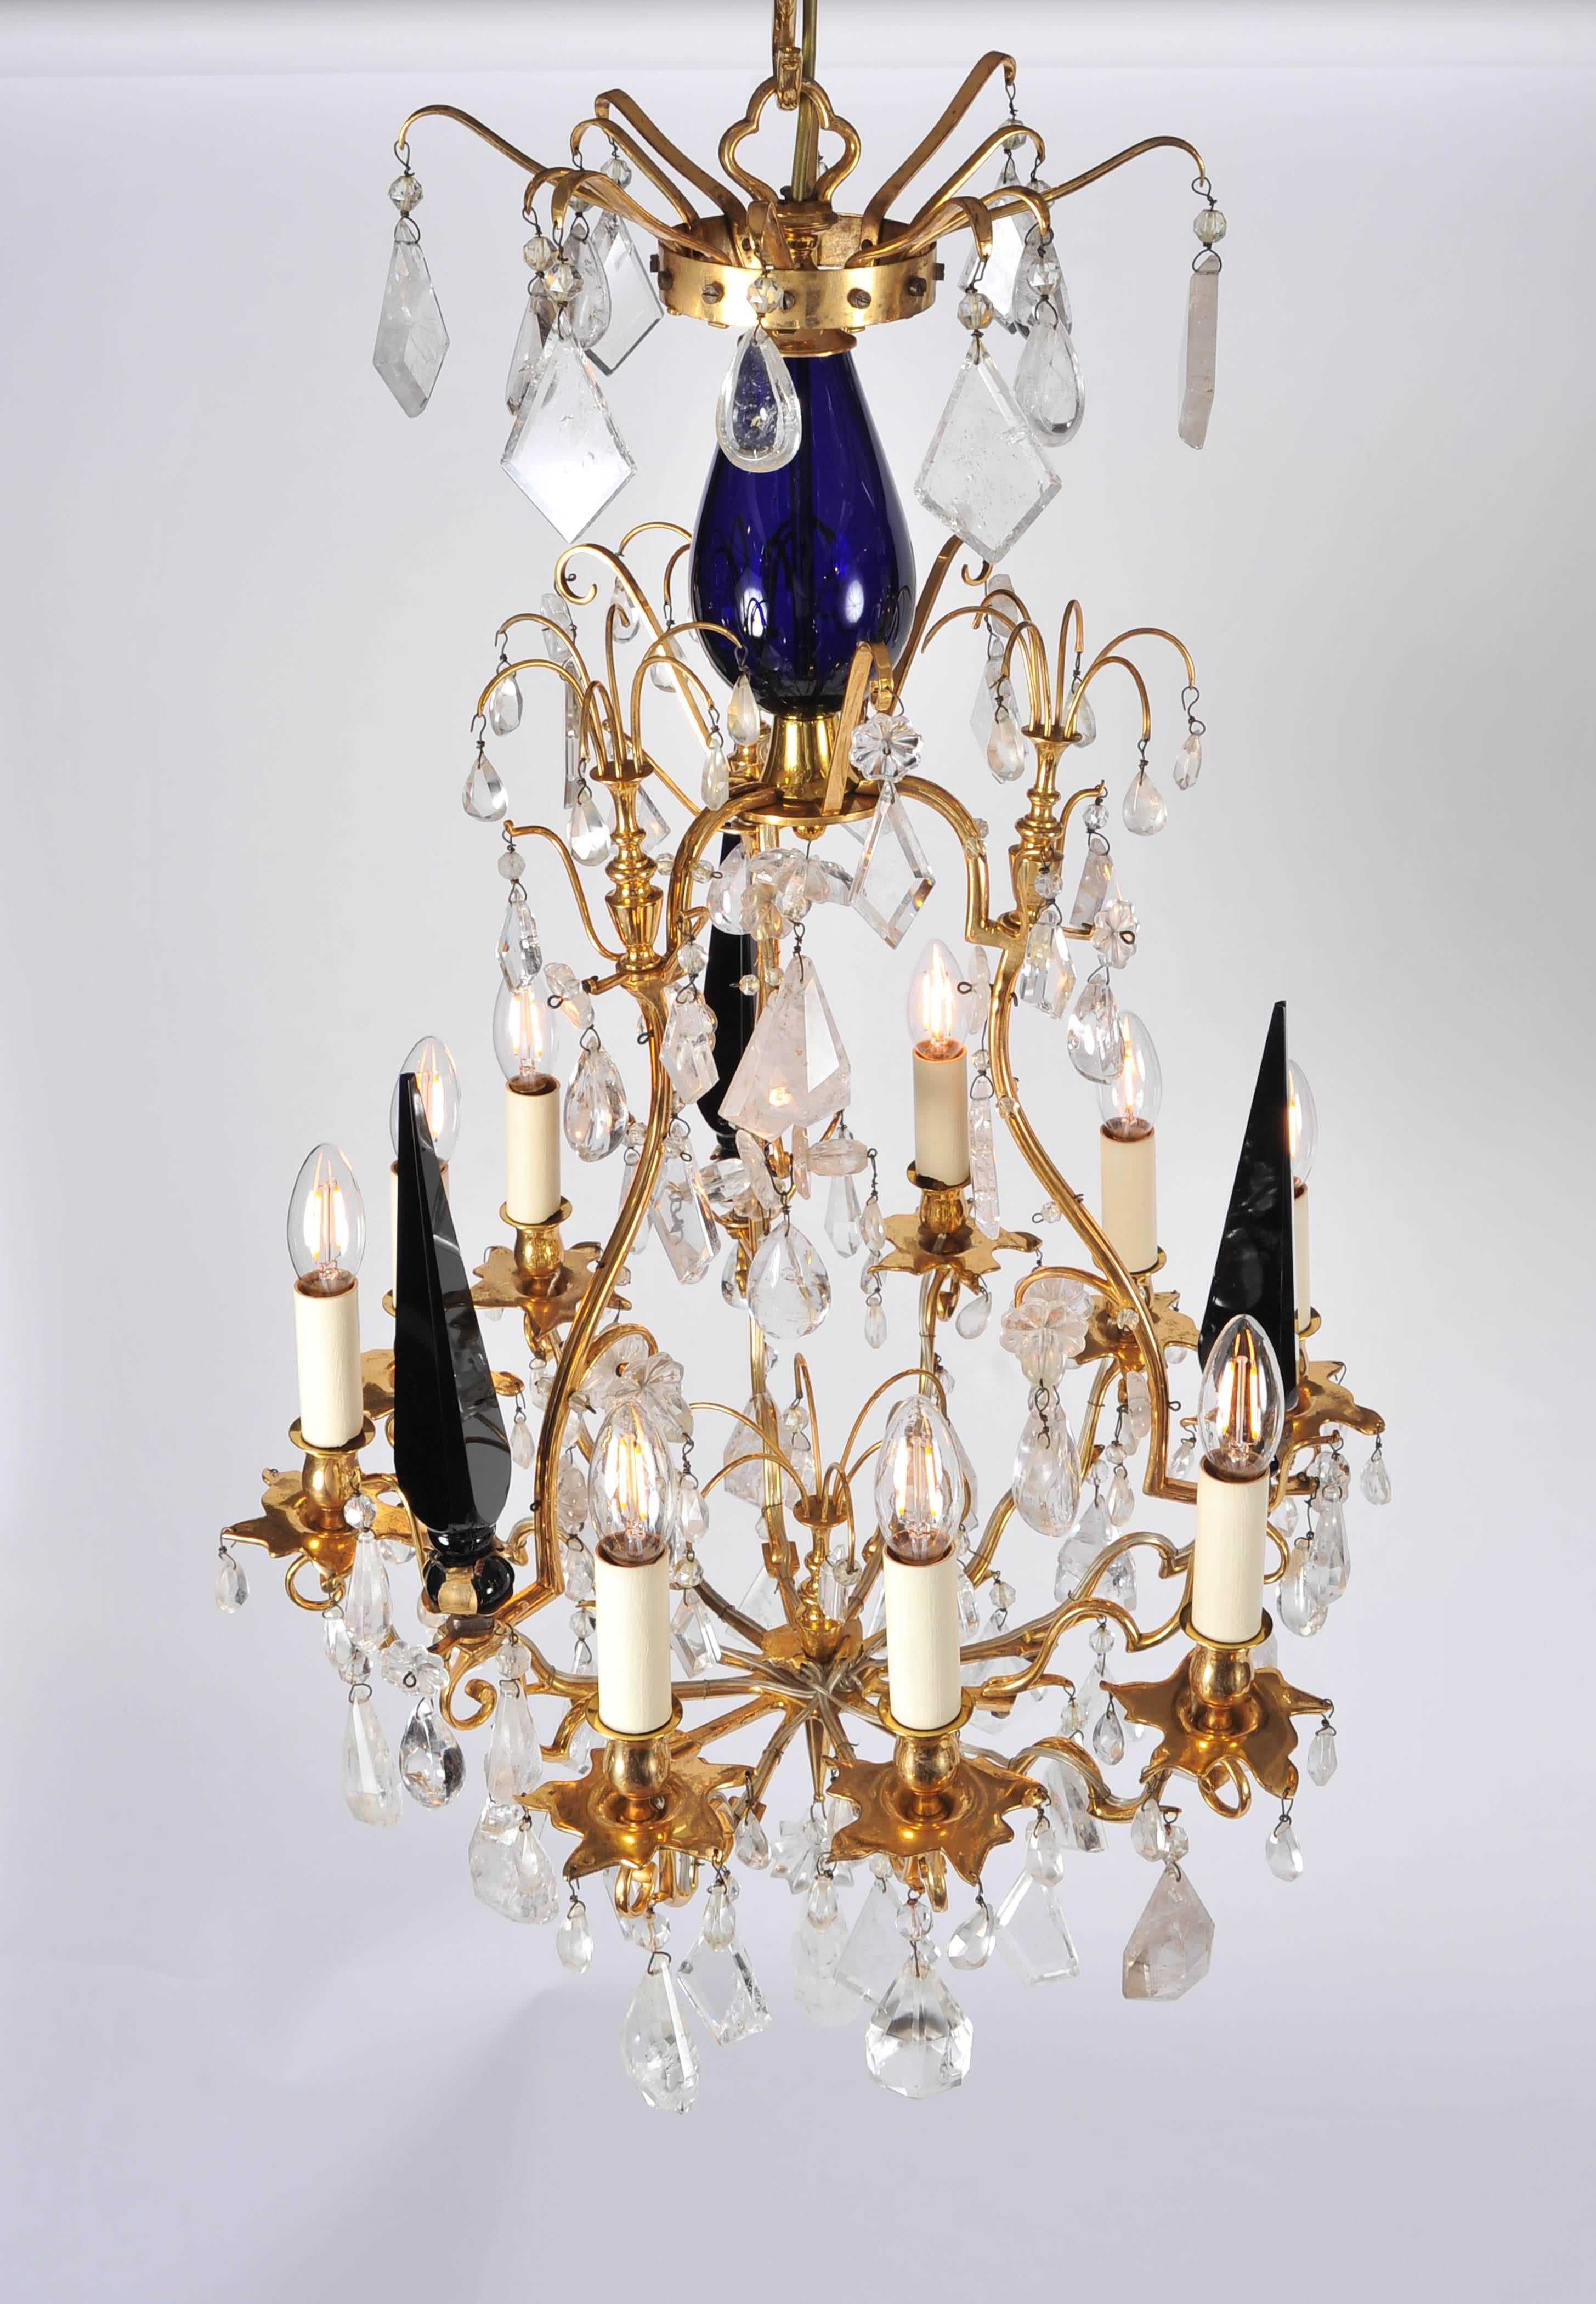 This pair of 20th century rock crystal chandeliers were formerly in residence at London's Mark's Club. The metalwork is finished in antique brass, dressed with rock crystal pear and kite pendants. Highlighted by eye catching solid blue tri-spikes